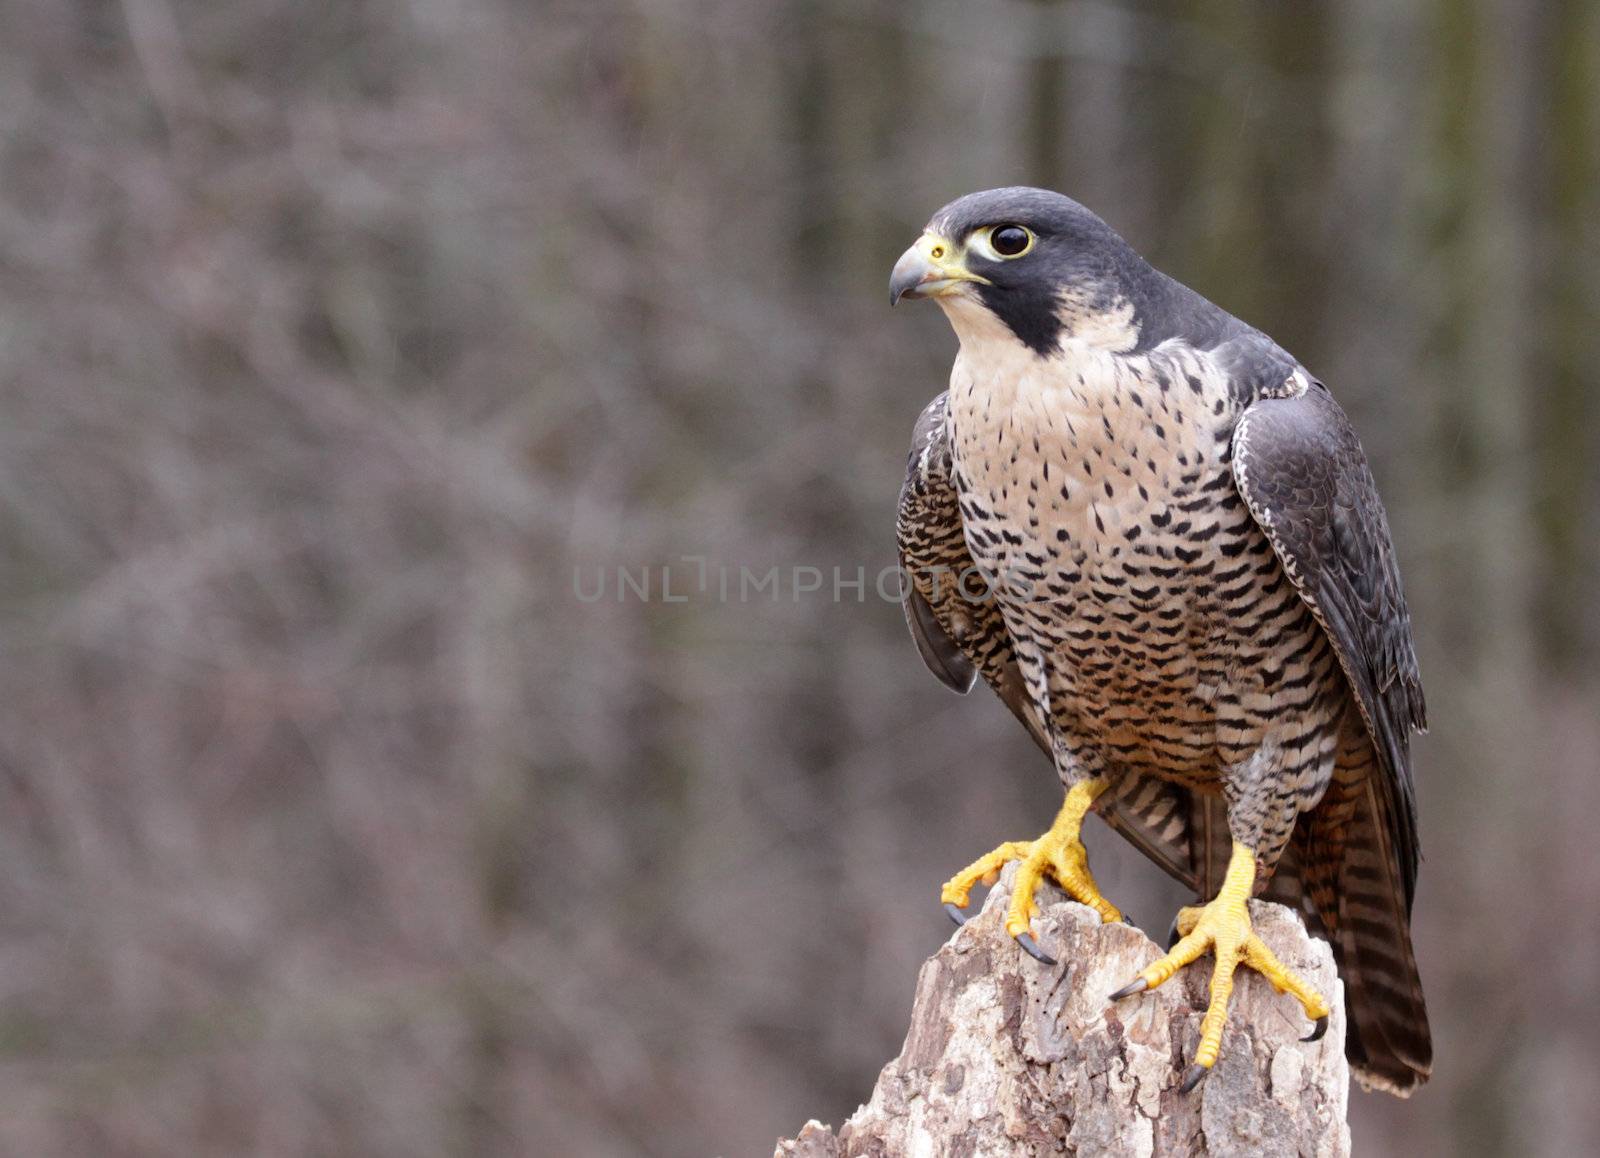 A Peregrine Falcon (Falco peregrinus) perched on a stump.  These birds are the fastest animals in the world.
